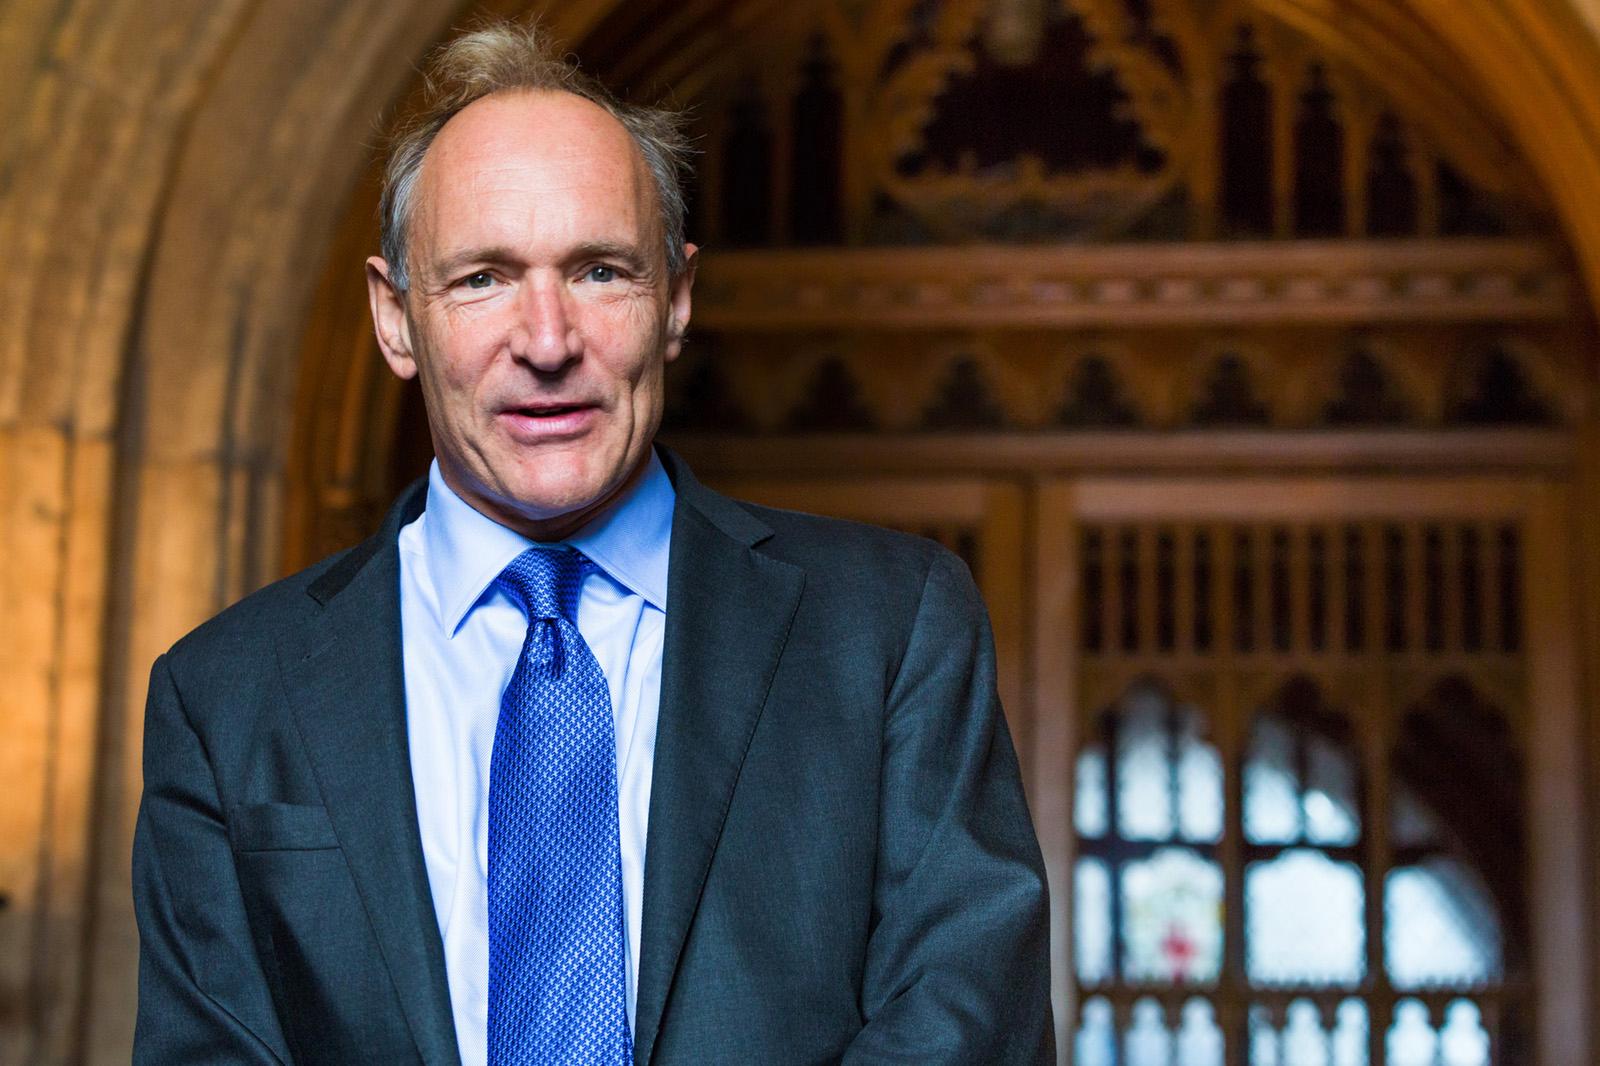  Scientist Tim Berners Lee - one of the most important figures of the 20th century